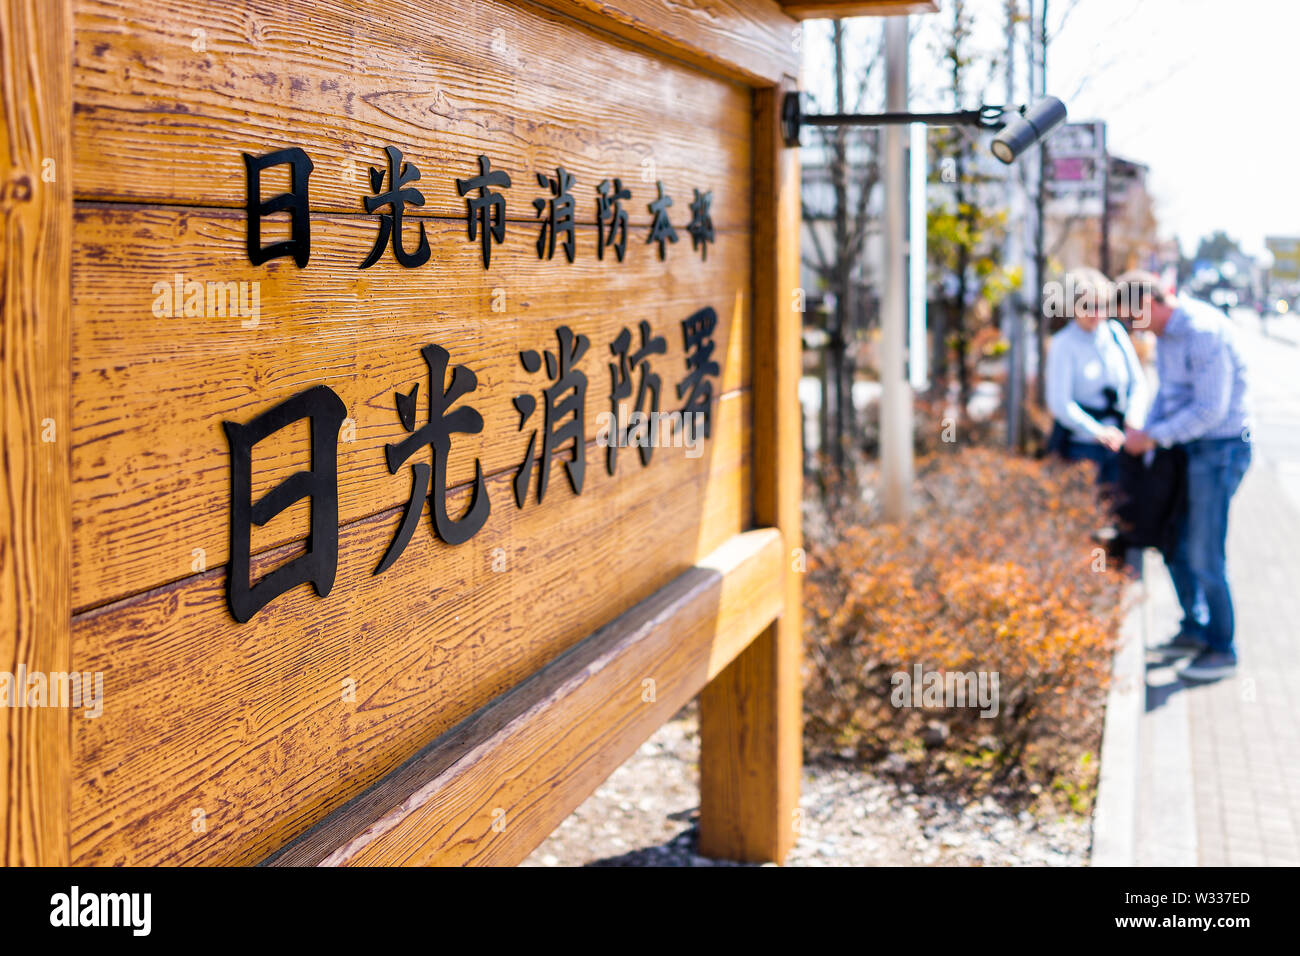 Nikko, Japan - April 4, 2019: Wooden board on street of mountain village with text saying Nikko City Fire Department sign, people in background on sid Stock Photo